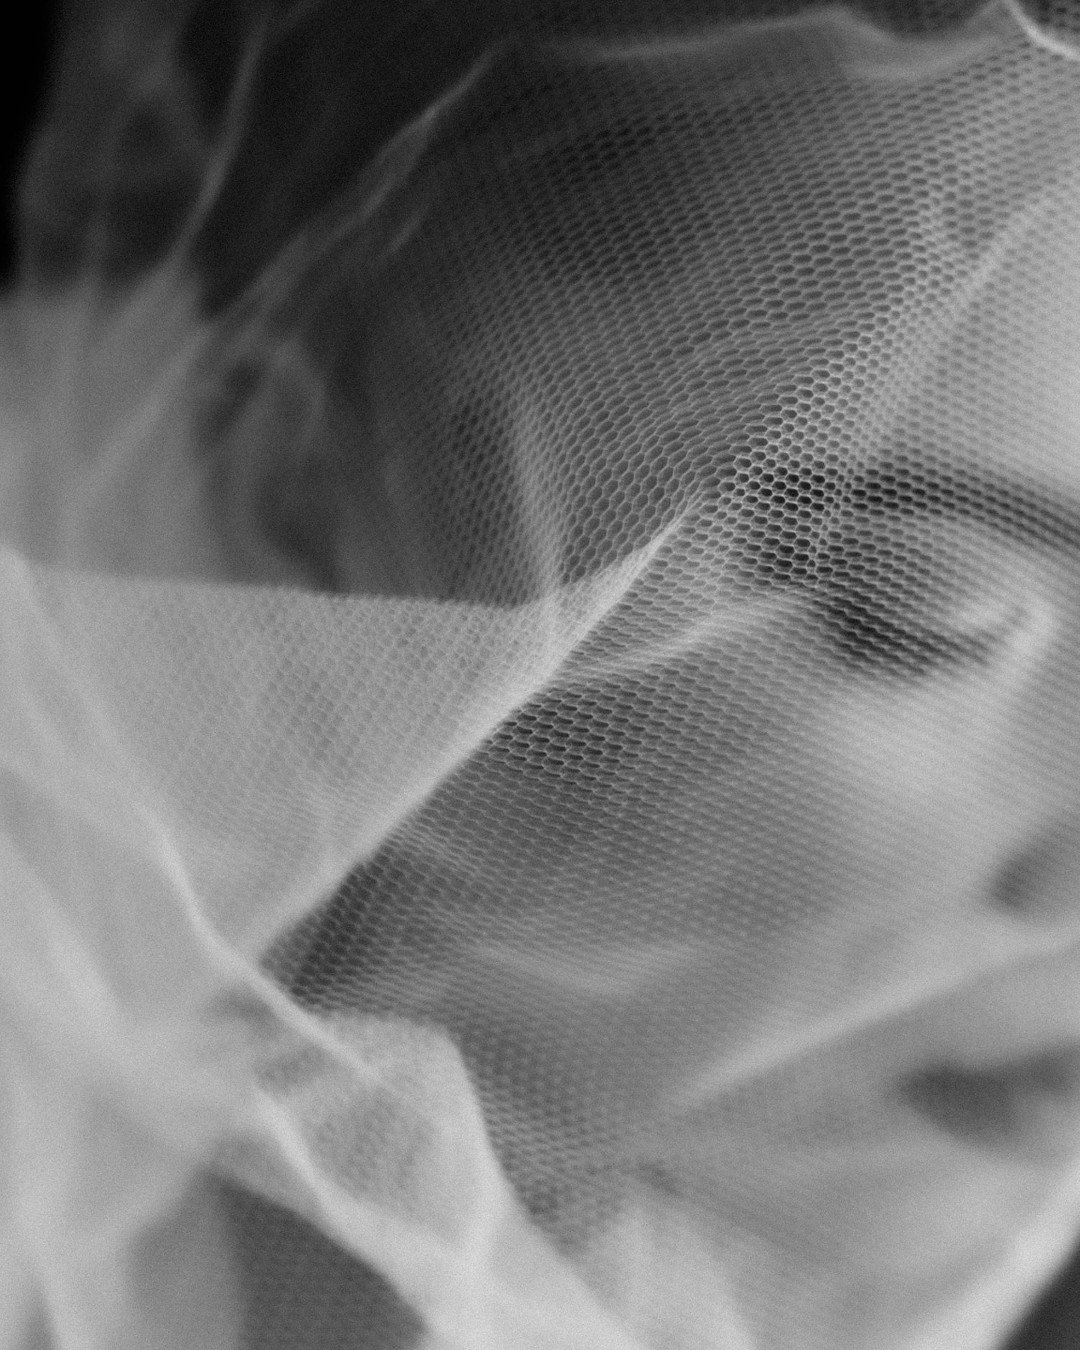 What do you think about this pic? I'm worried this fabric (though I love it) is a bit overdone :)
-
-
-
-
-
-
-
-
-
#selfportraitphotography #bw_perfect #bnw_demand #monochromesapiens #phasesmag #artofportrait #impressionistphotography #blackandwhite